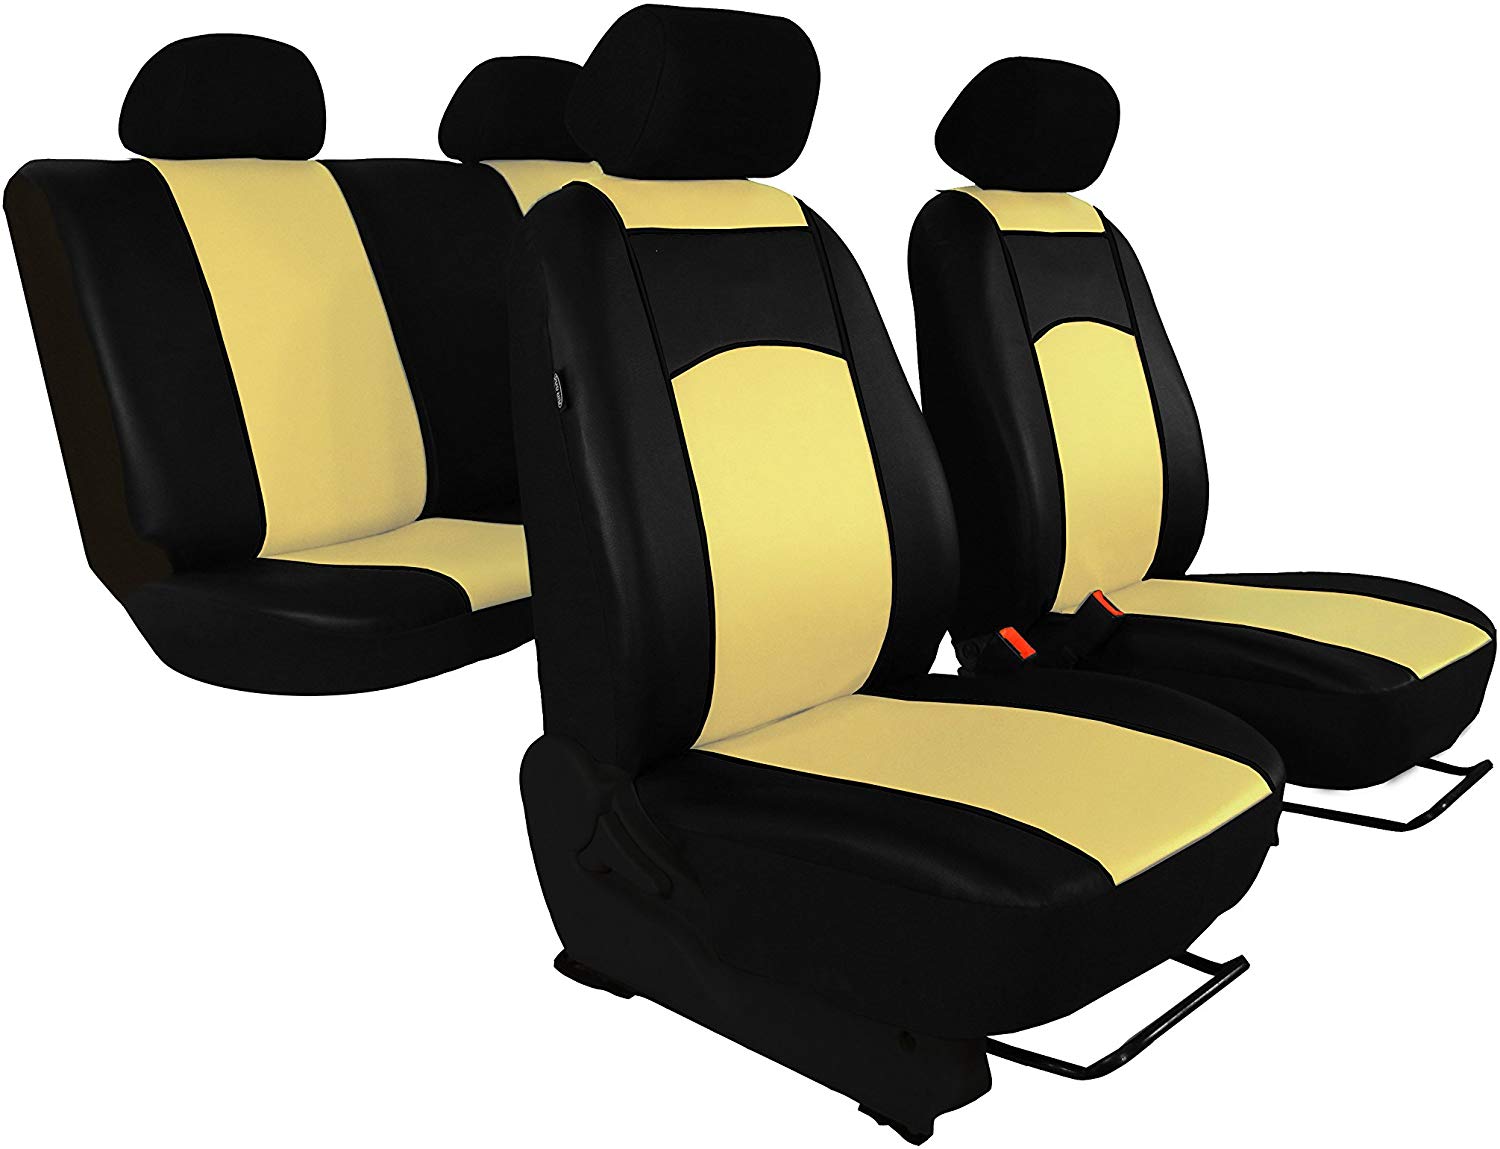 POK-TER-TUNING For Passat B6 2005-2010 (without sports seats), high-quality, custom-fit seat covers, protective covers, artificial leather, 7 colours